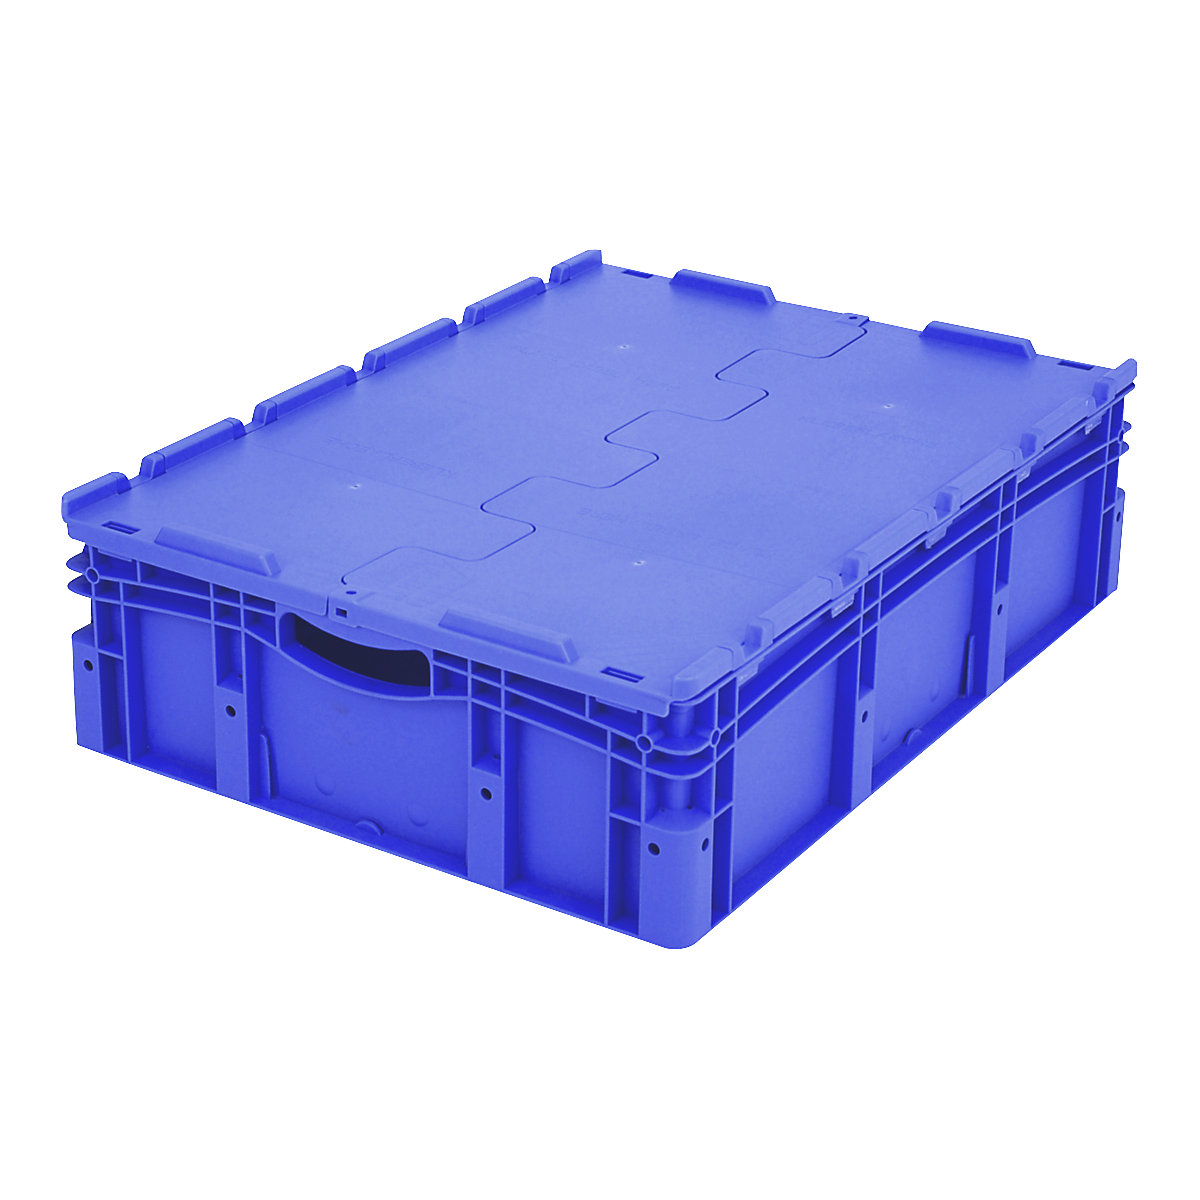 XL Euro stacking container – BITO, with 2-section hinged lid, LxWxH 800 x 600 x 238 mm-7